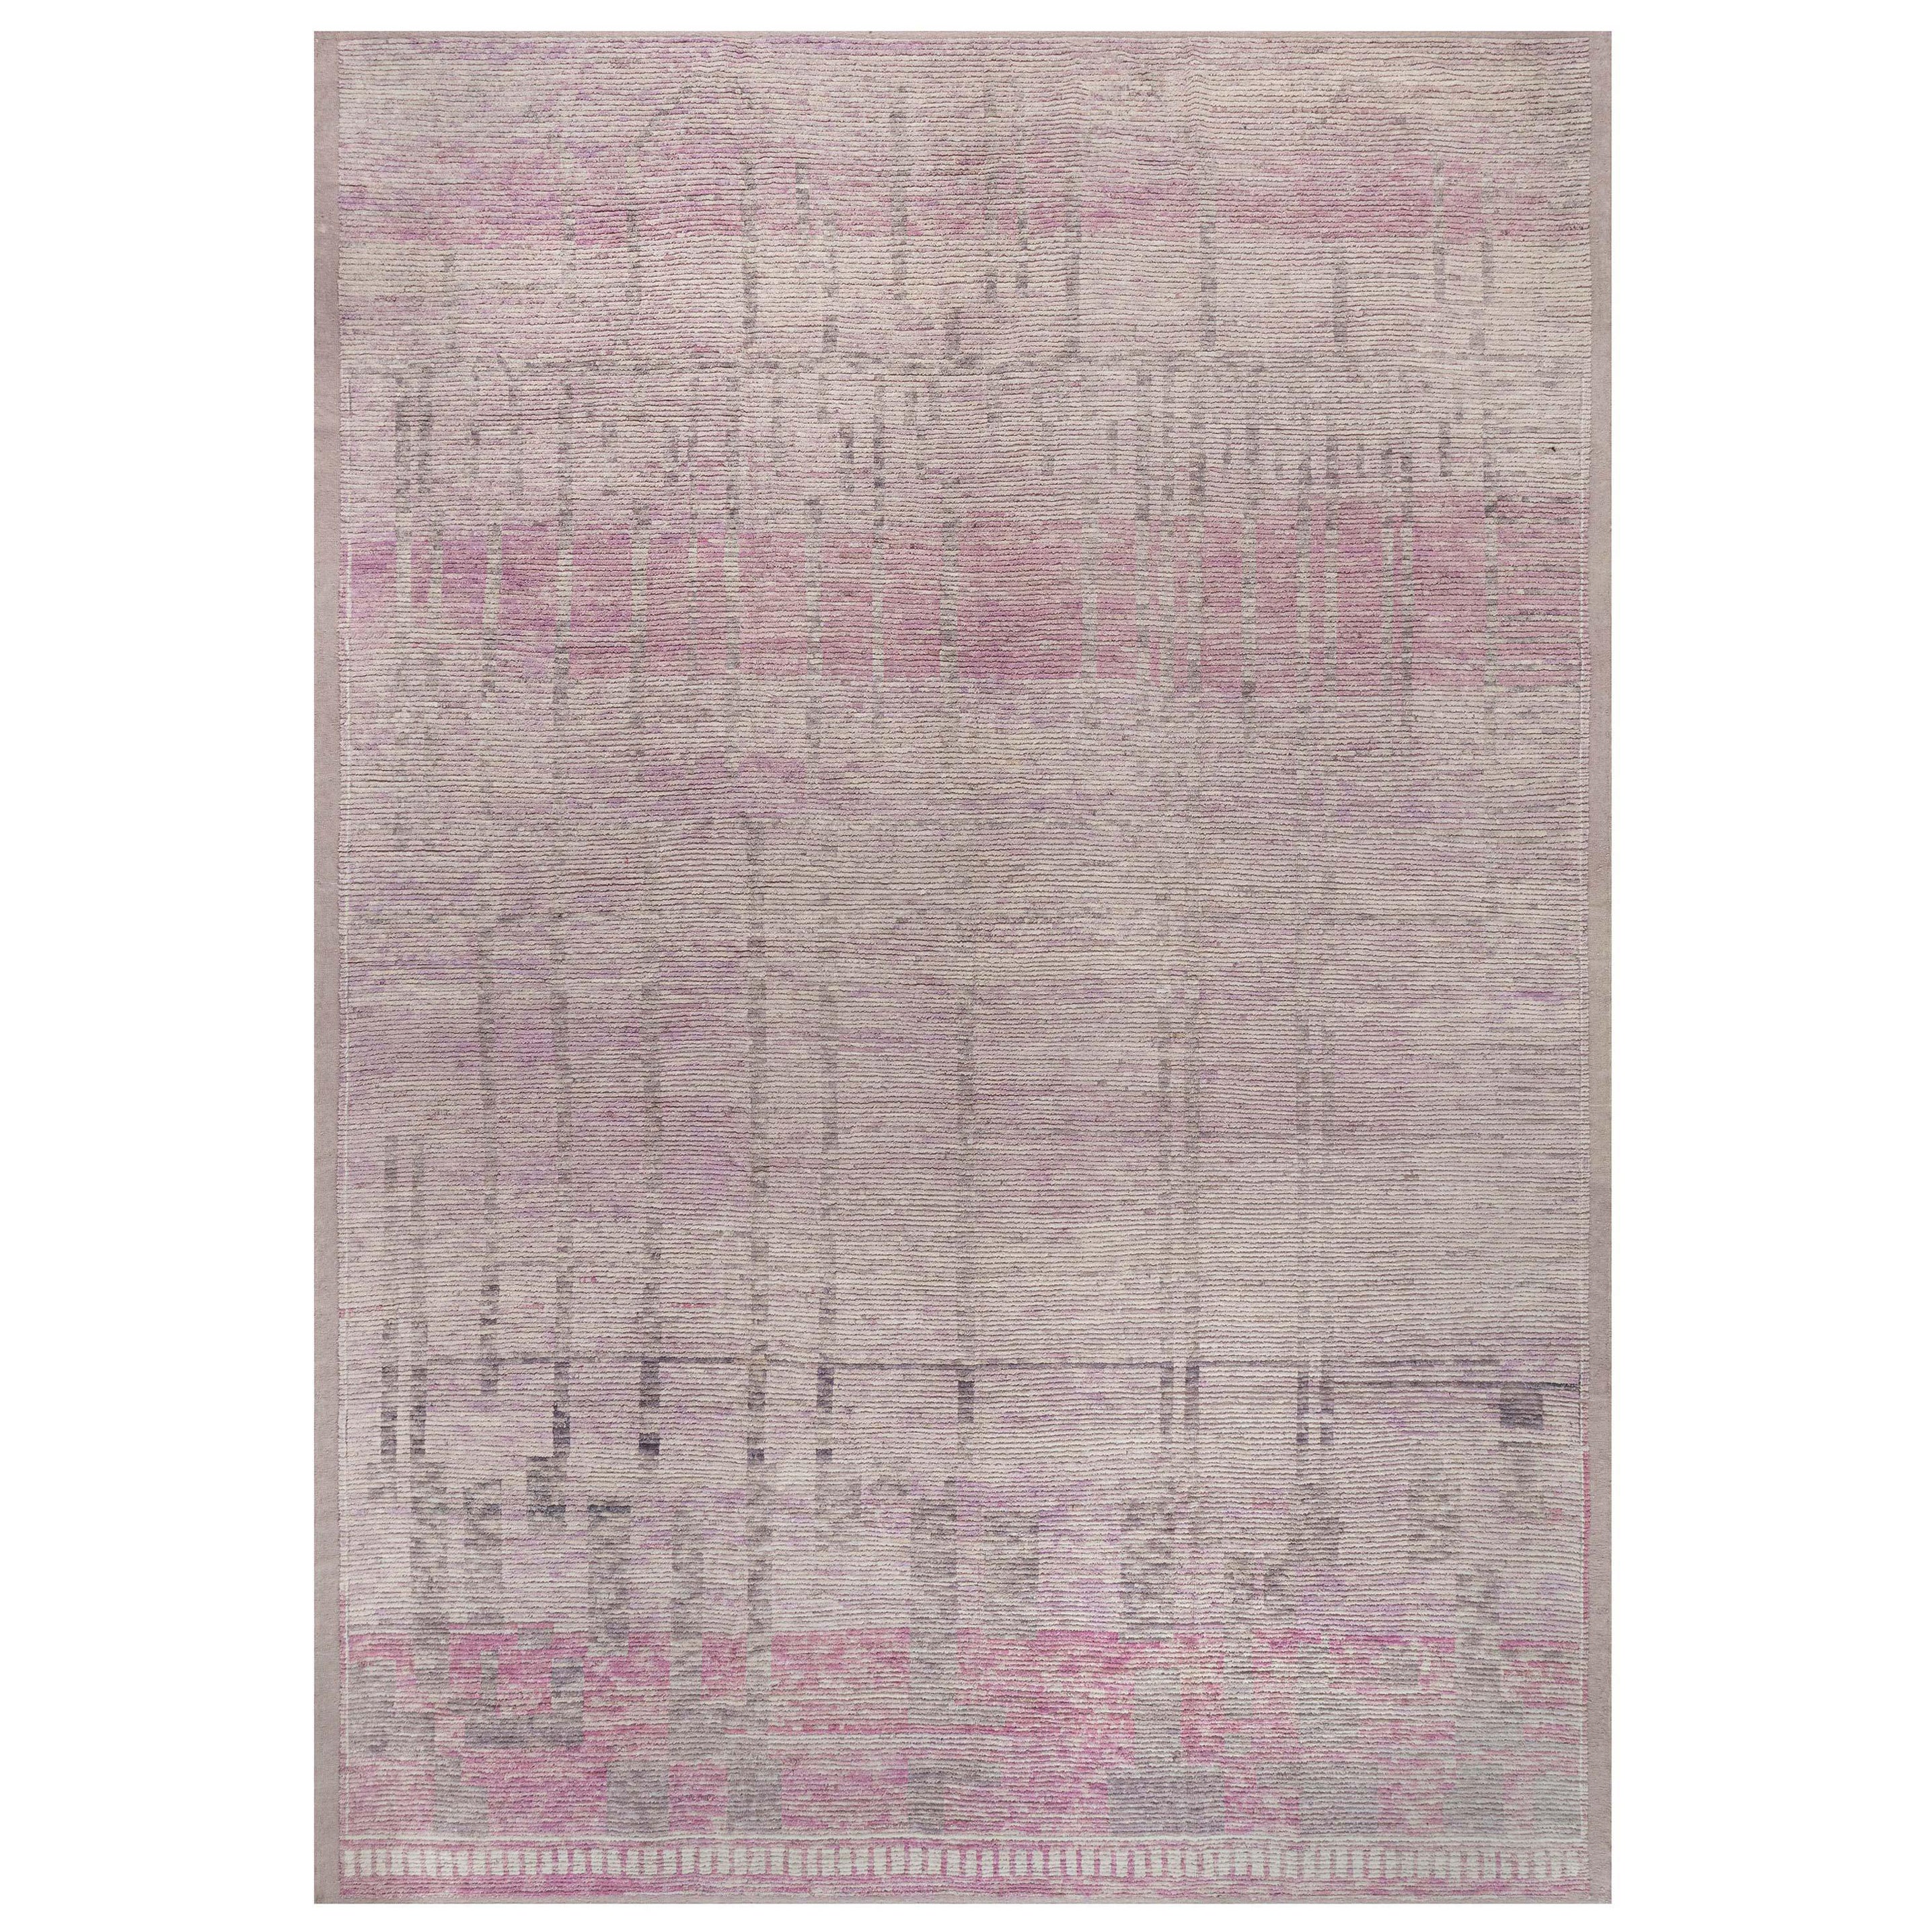 Tribal Style Moroccan Rug in Shades of Pink by Doris Leslie Blau For Sale